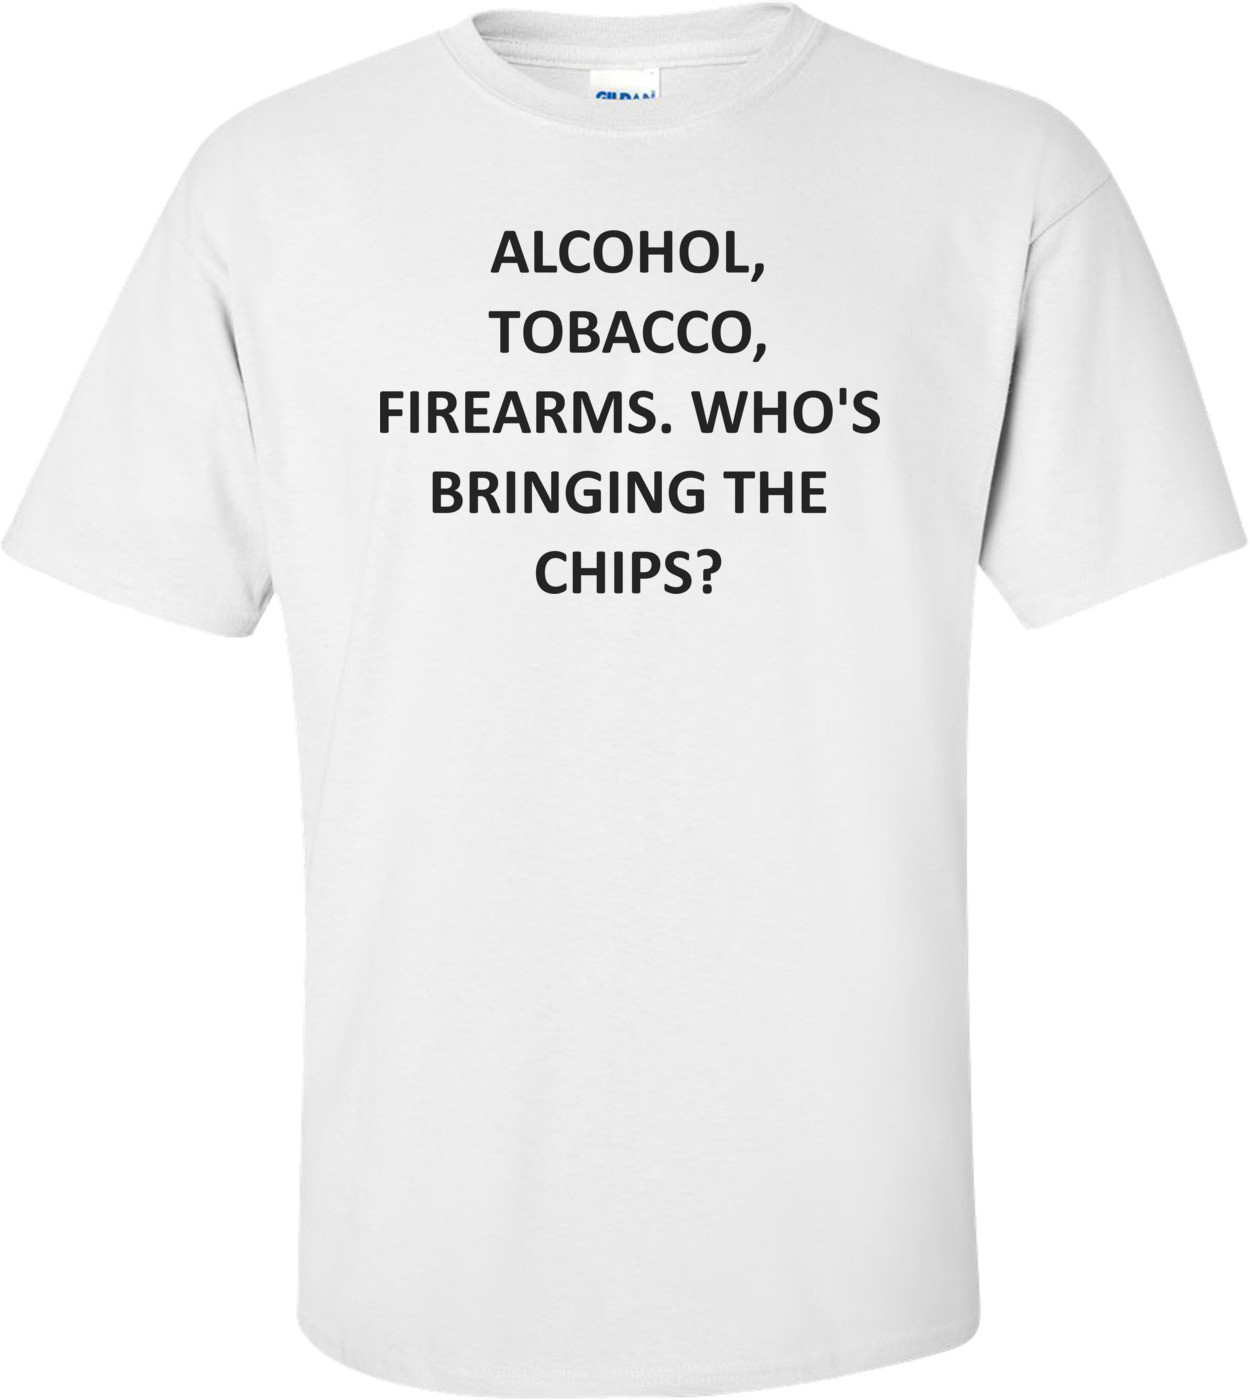 ALCOHOL, TOBACCO, FIREARMS. WHO'S BRINGING THE CHIPS?